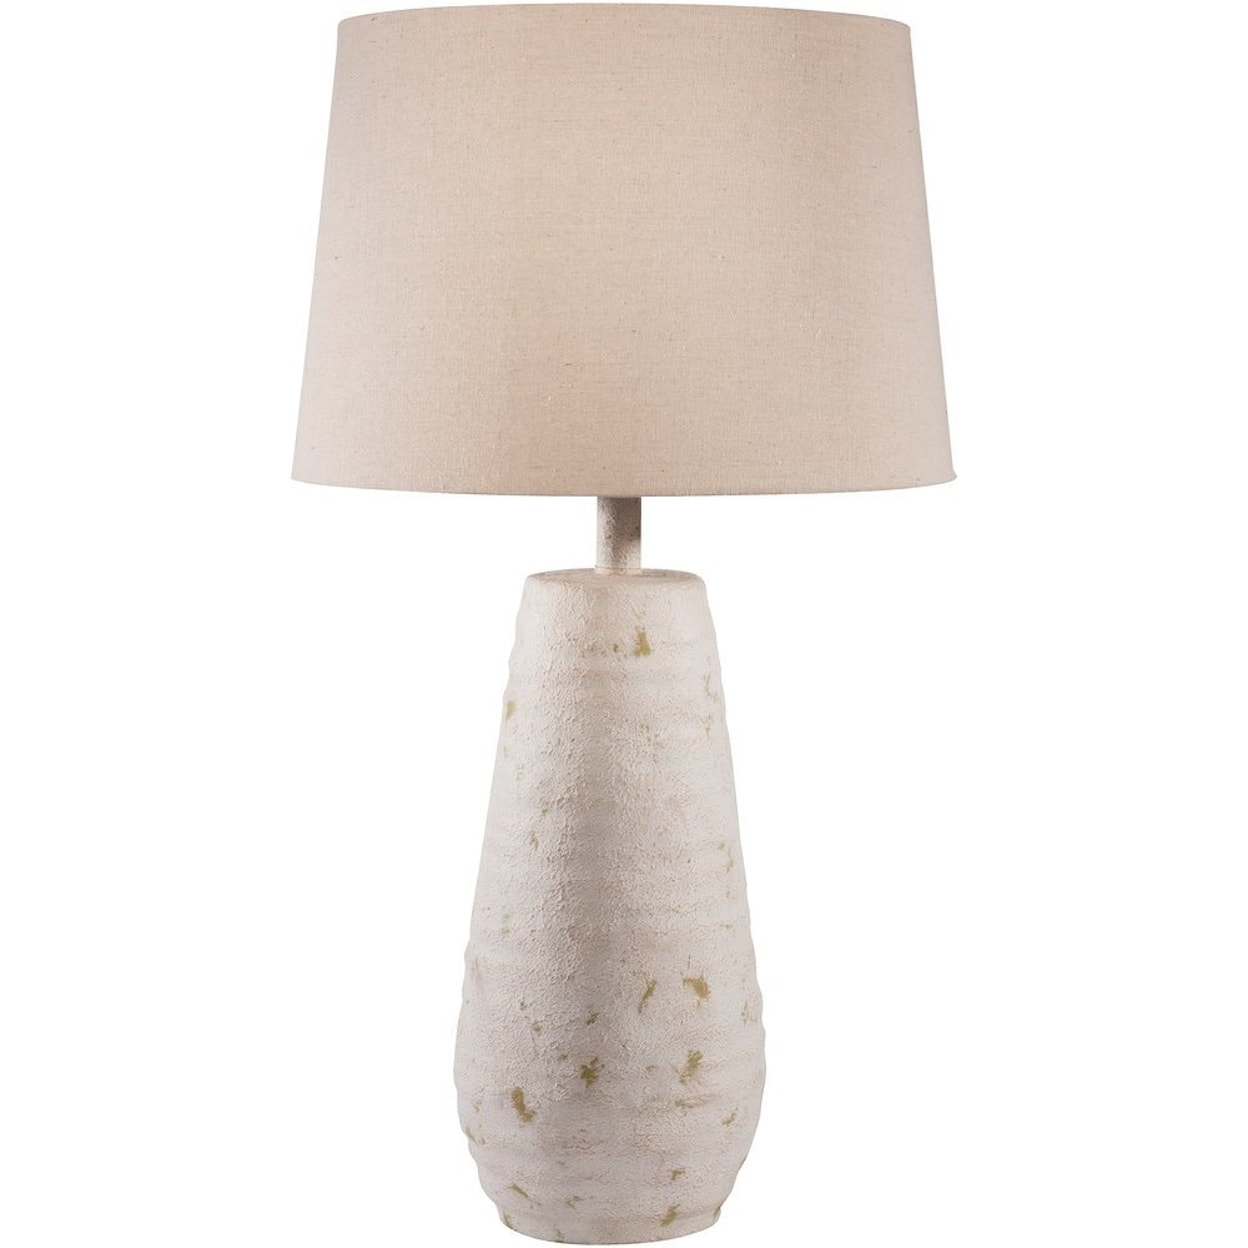 Surya Maggie Antiqued White Rustic Table Lamp